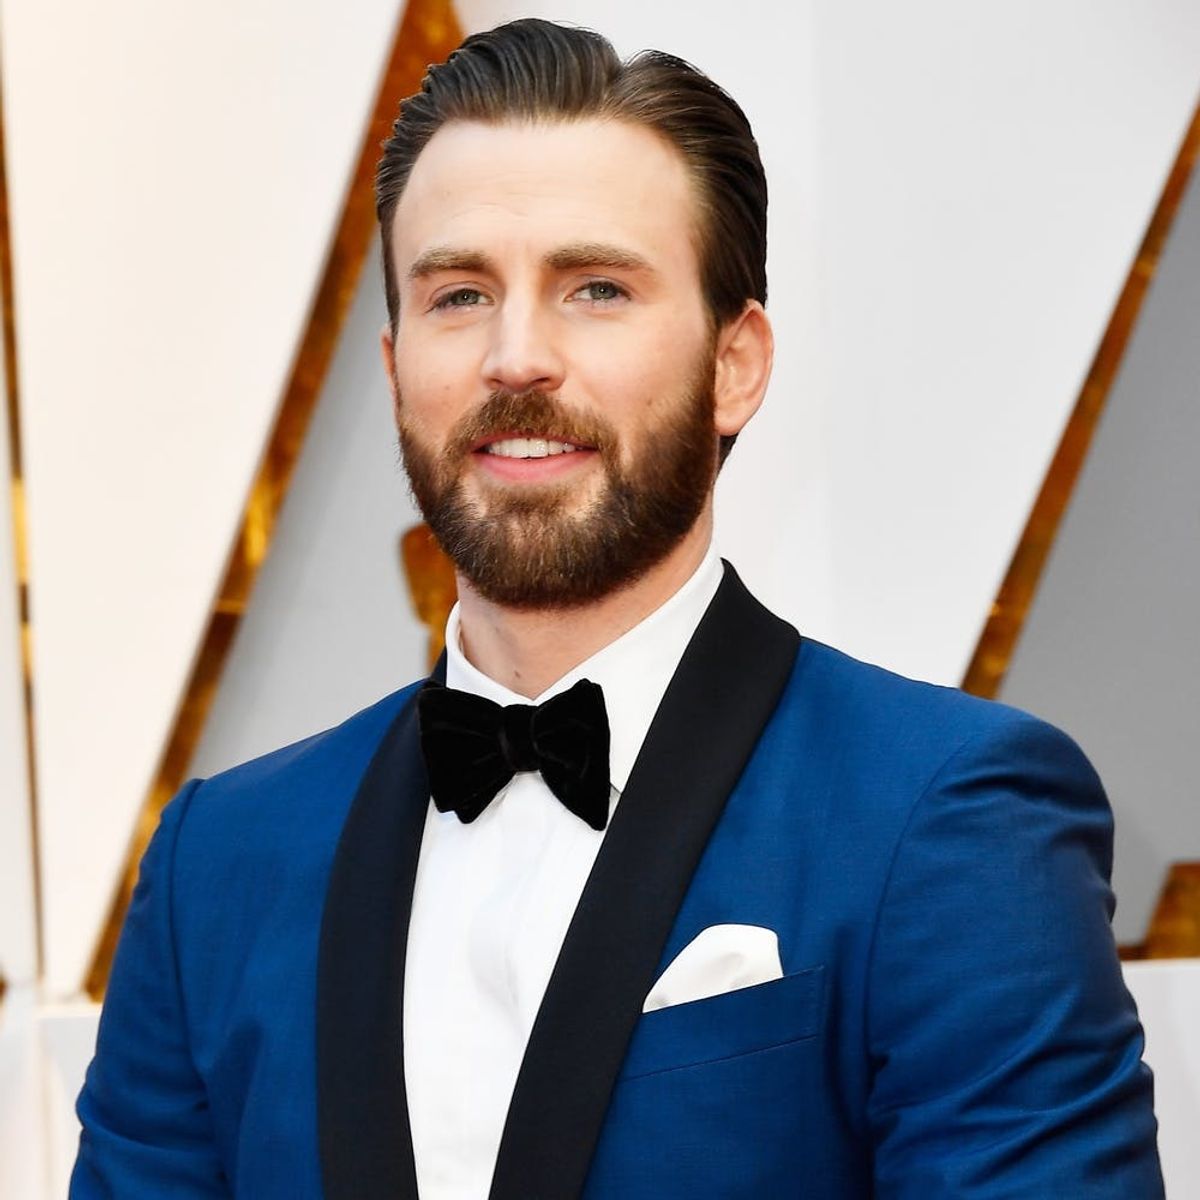 Chris Evans’ Touching Tribute to a Young Fan Who Died of Cancer Will Make You Weep